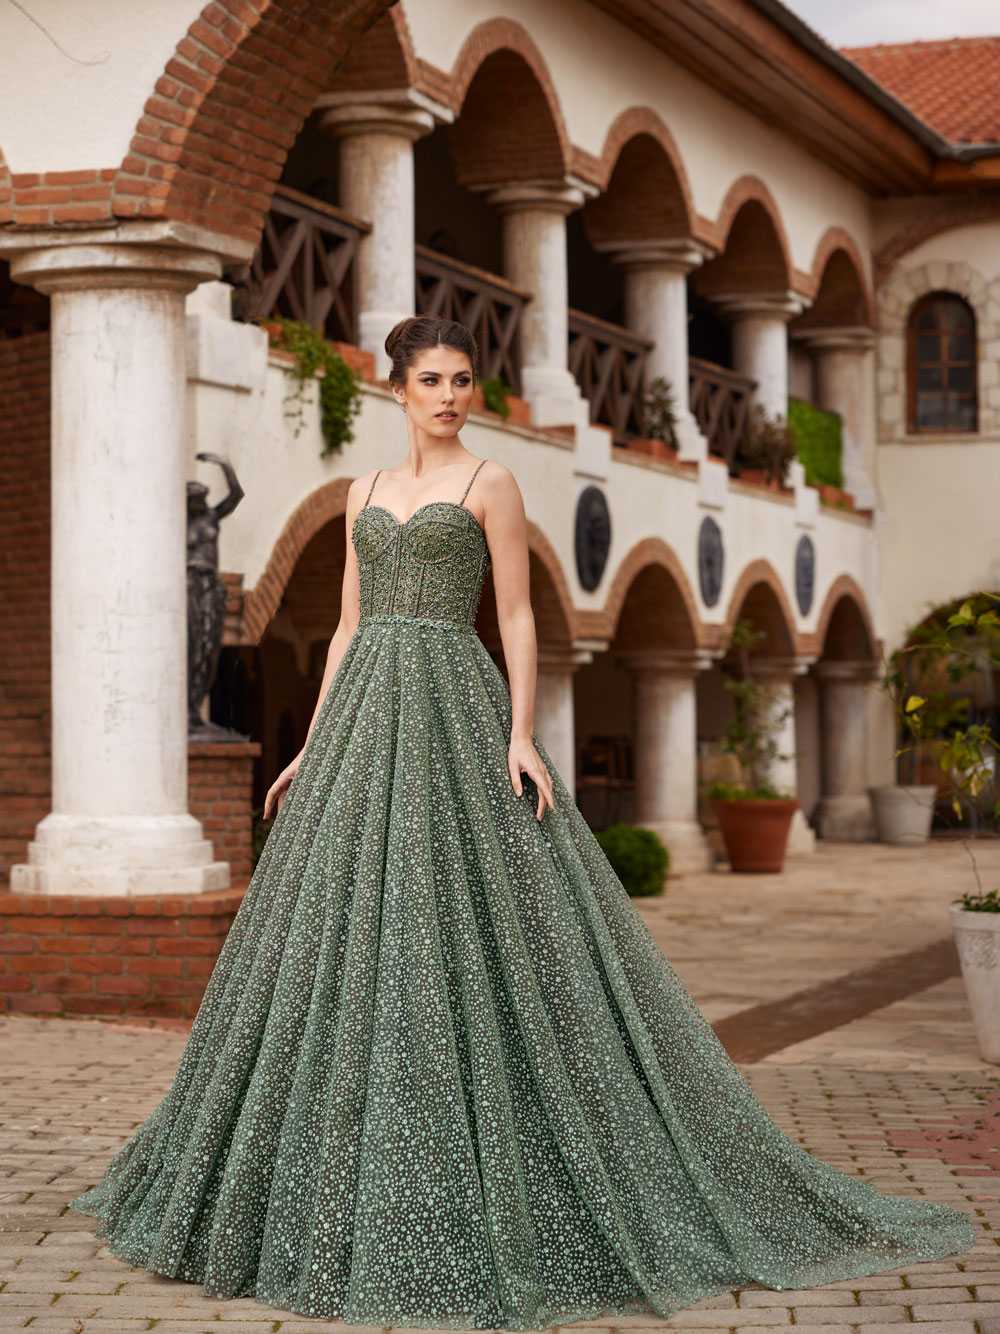 buy Light Green Beaded Lace Bodice A Line Prom Formal Evening Dress plus sizes tall brides online prom dresses boutiques for sale 